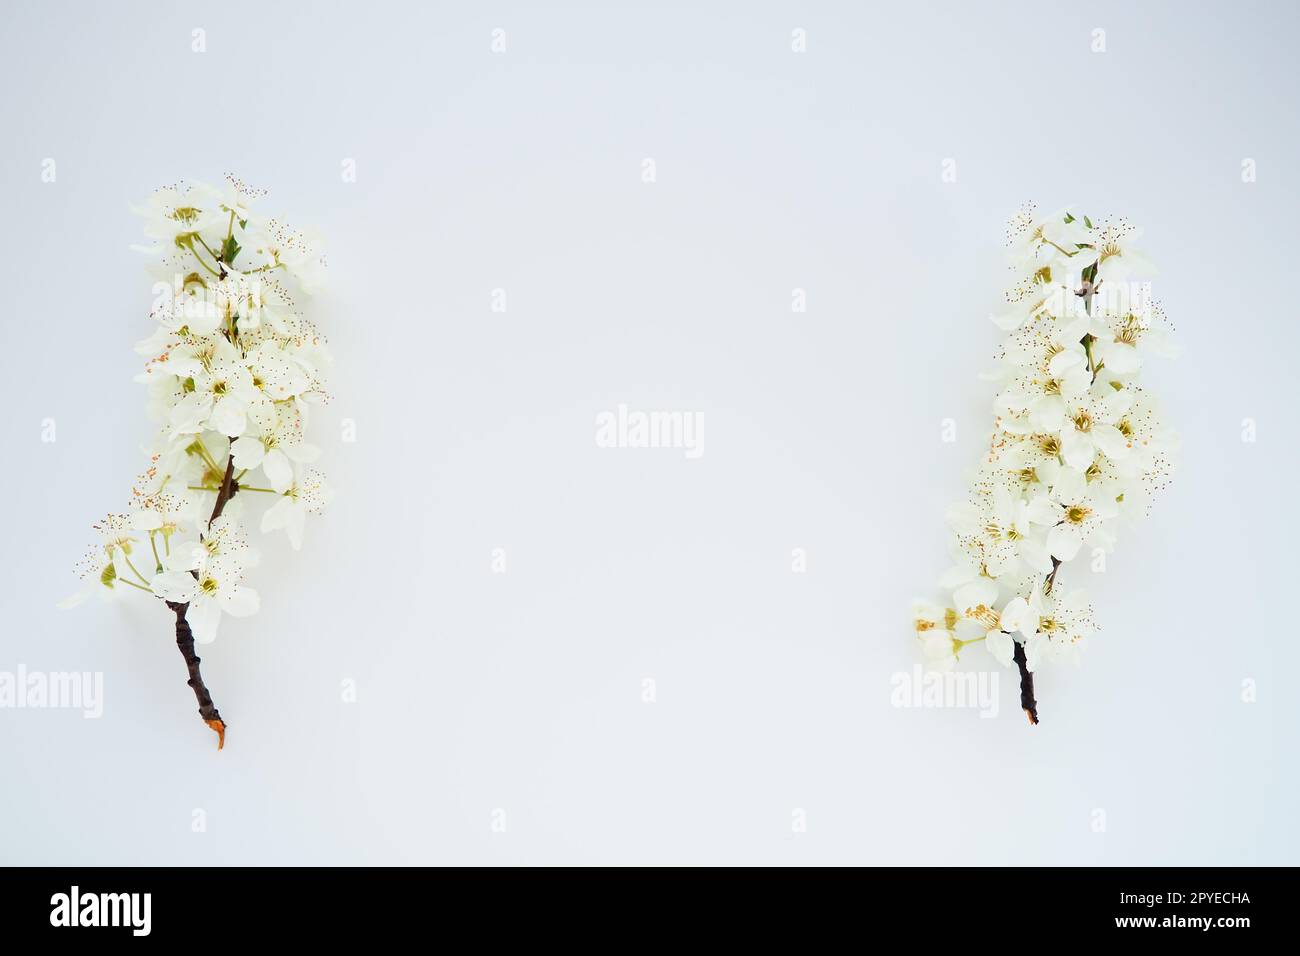 Bird cherry, cherry or sweet cherry flowers on a white background. Copy space for text. Spring flowers on a plain white sheet of paper. Two branches left and right. Free space in the middle. Stock Photo